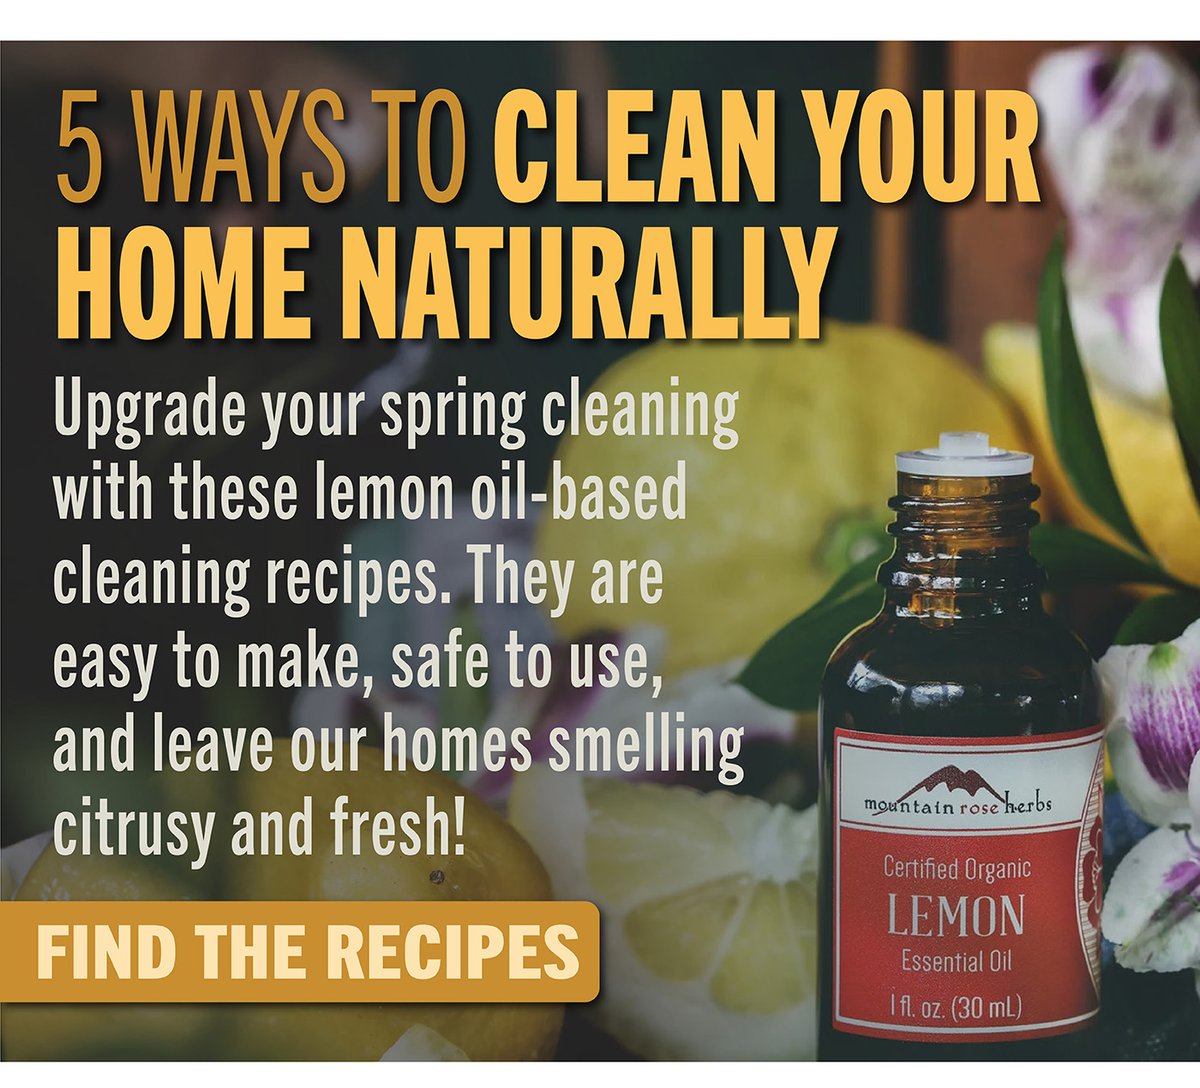 5 Ways to Clean Your Home Naturally